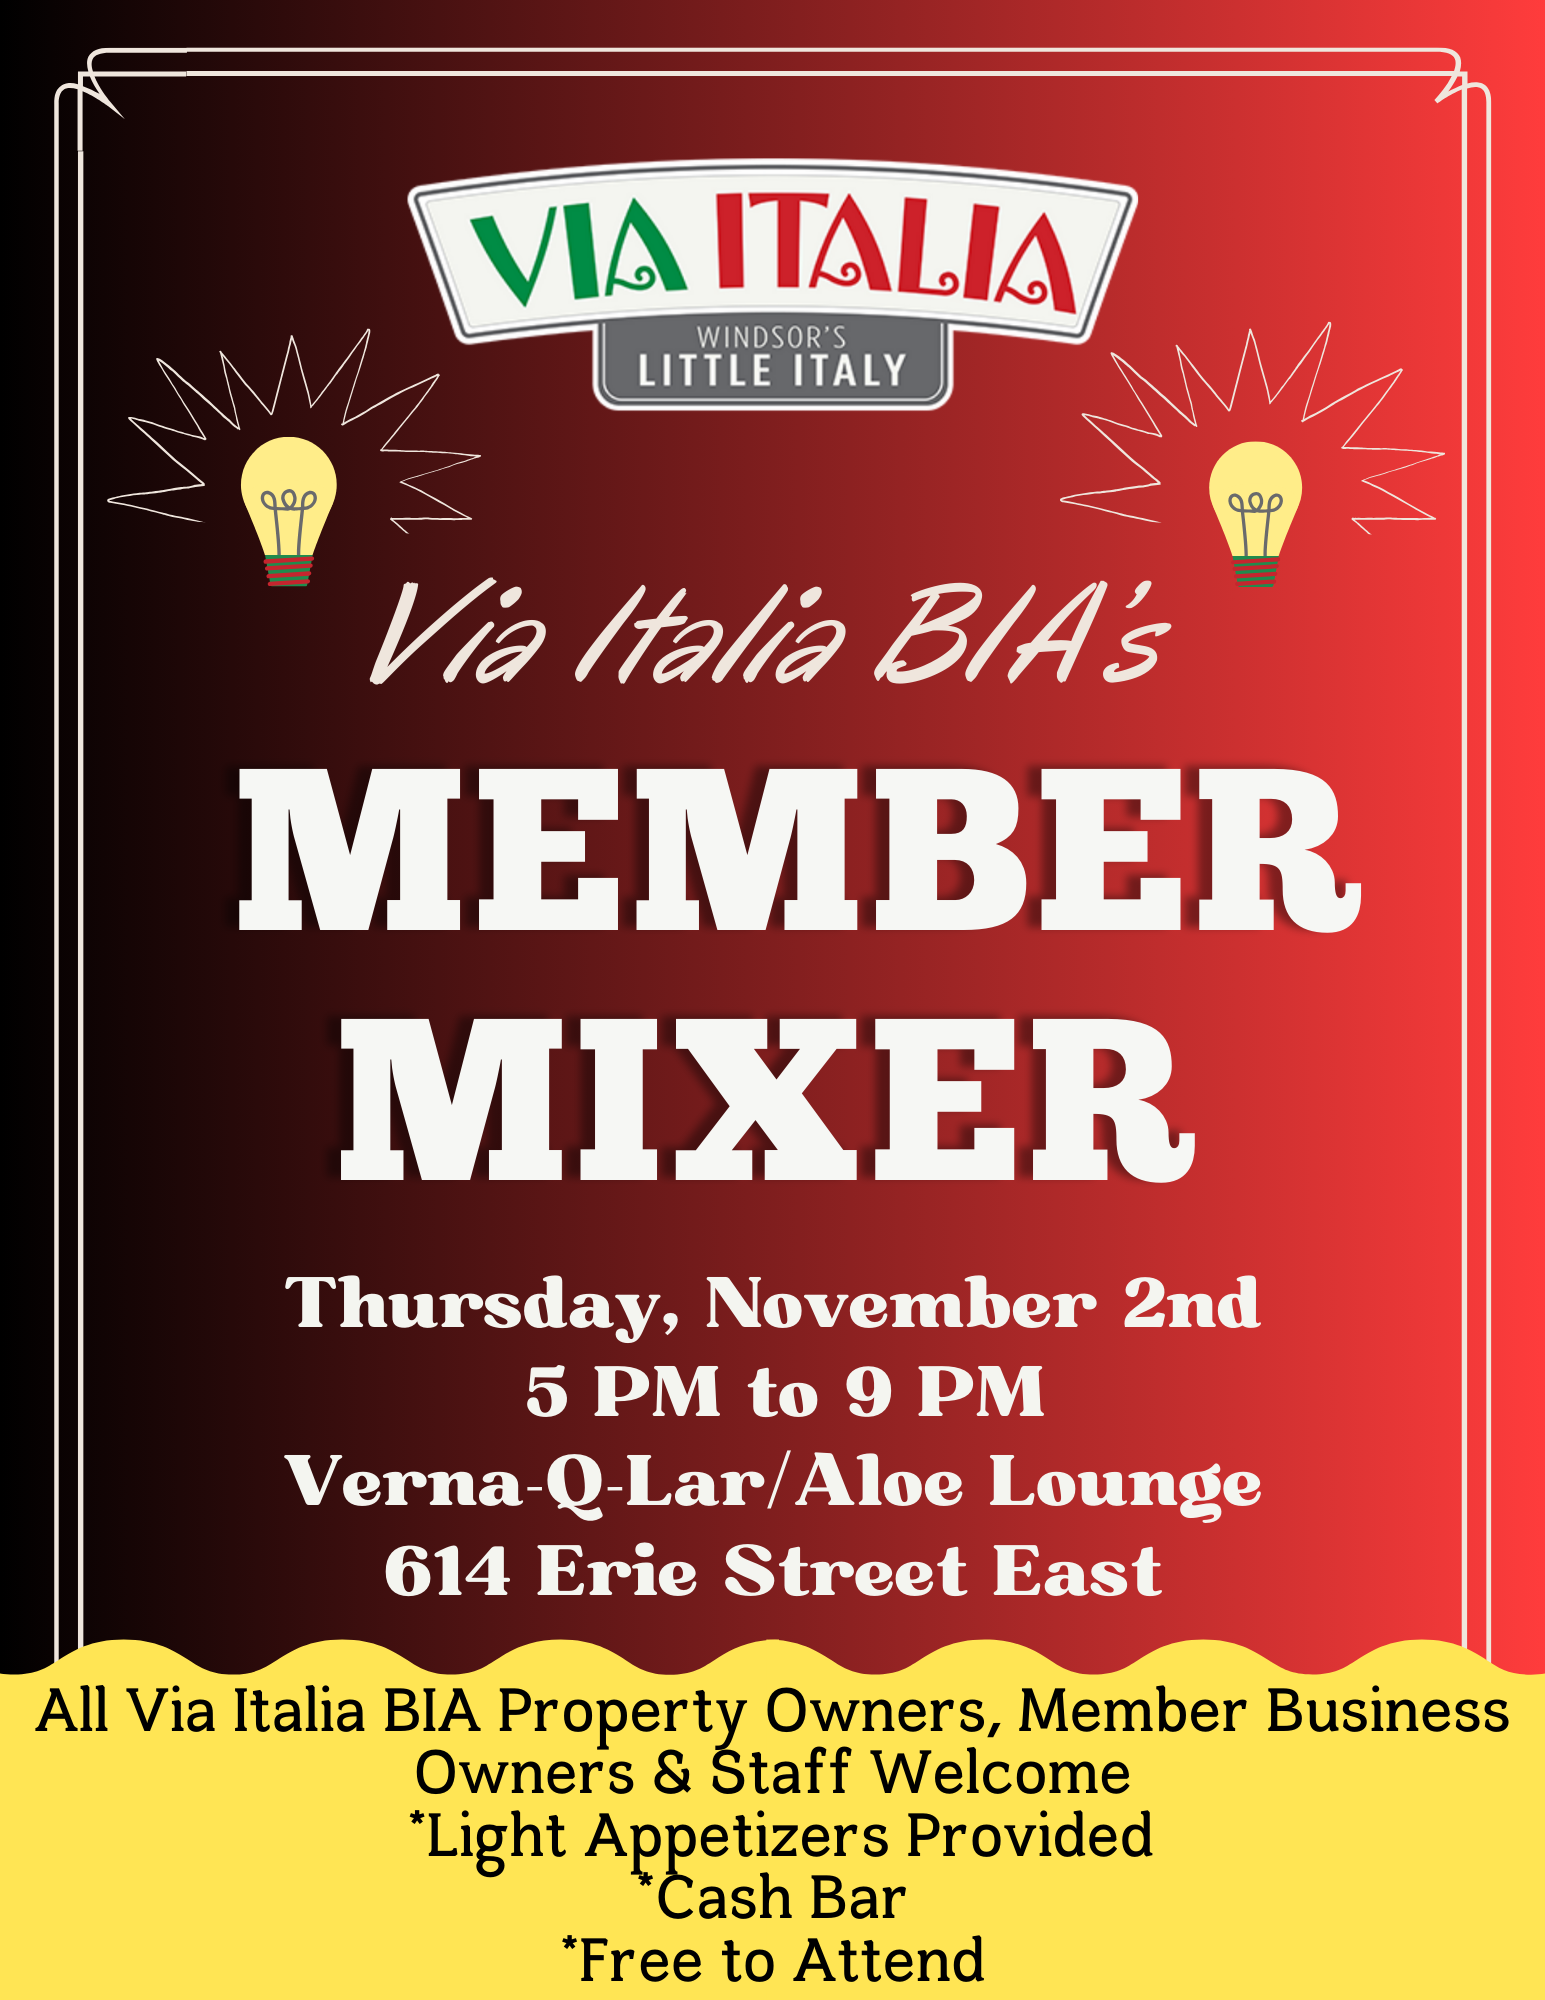 Invite Property, Business Owners and Staff of Via Italia to a Member Mixer on Nov 2, 2023 to Verna-q-lar Lounge from 5 to 9 pm